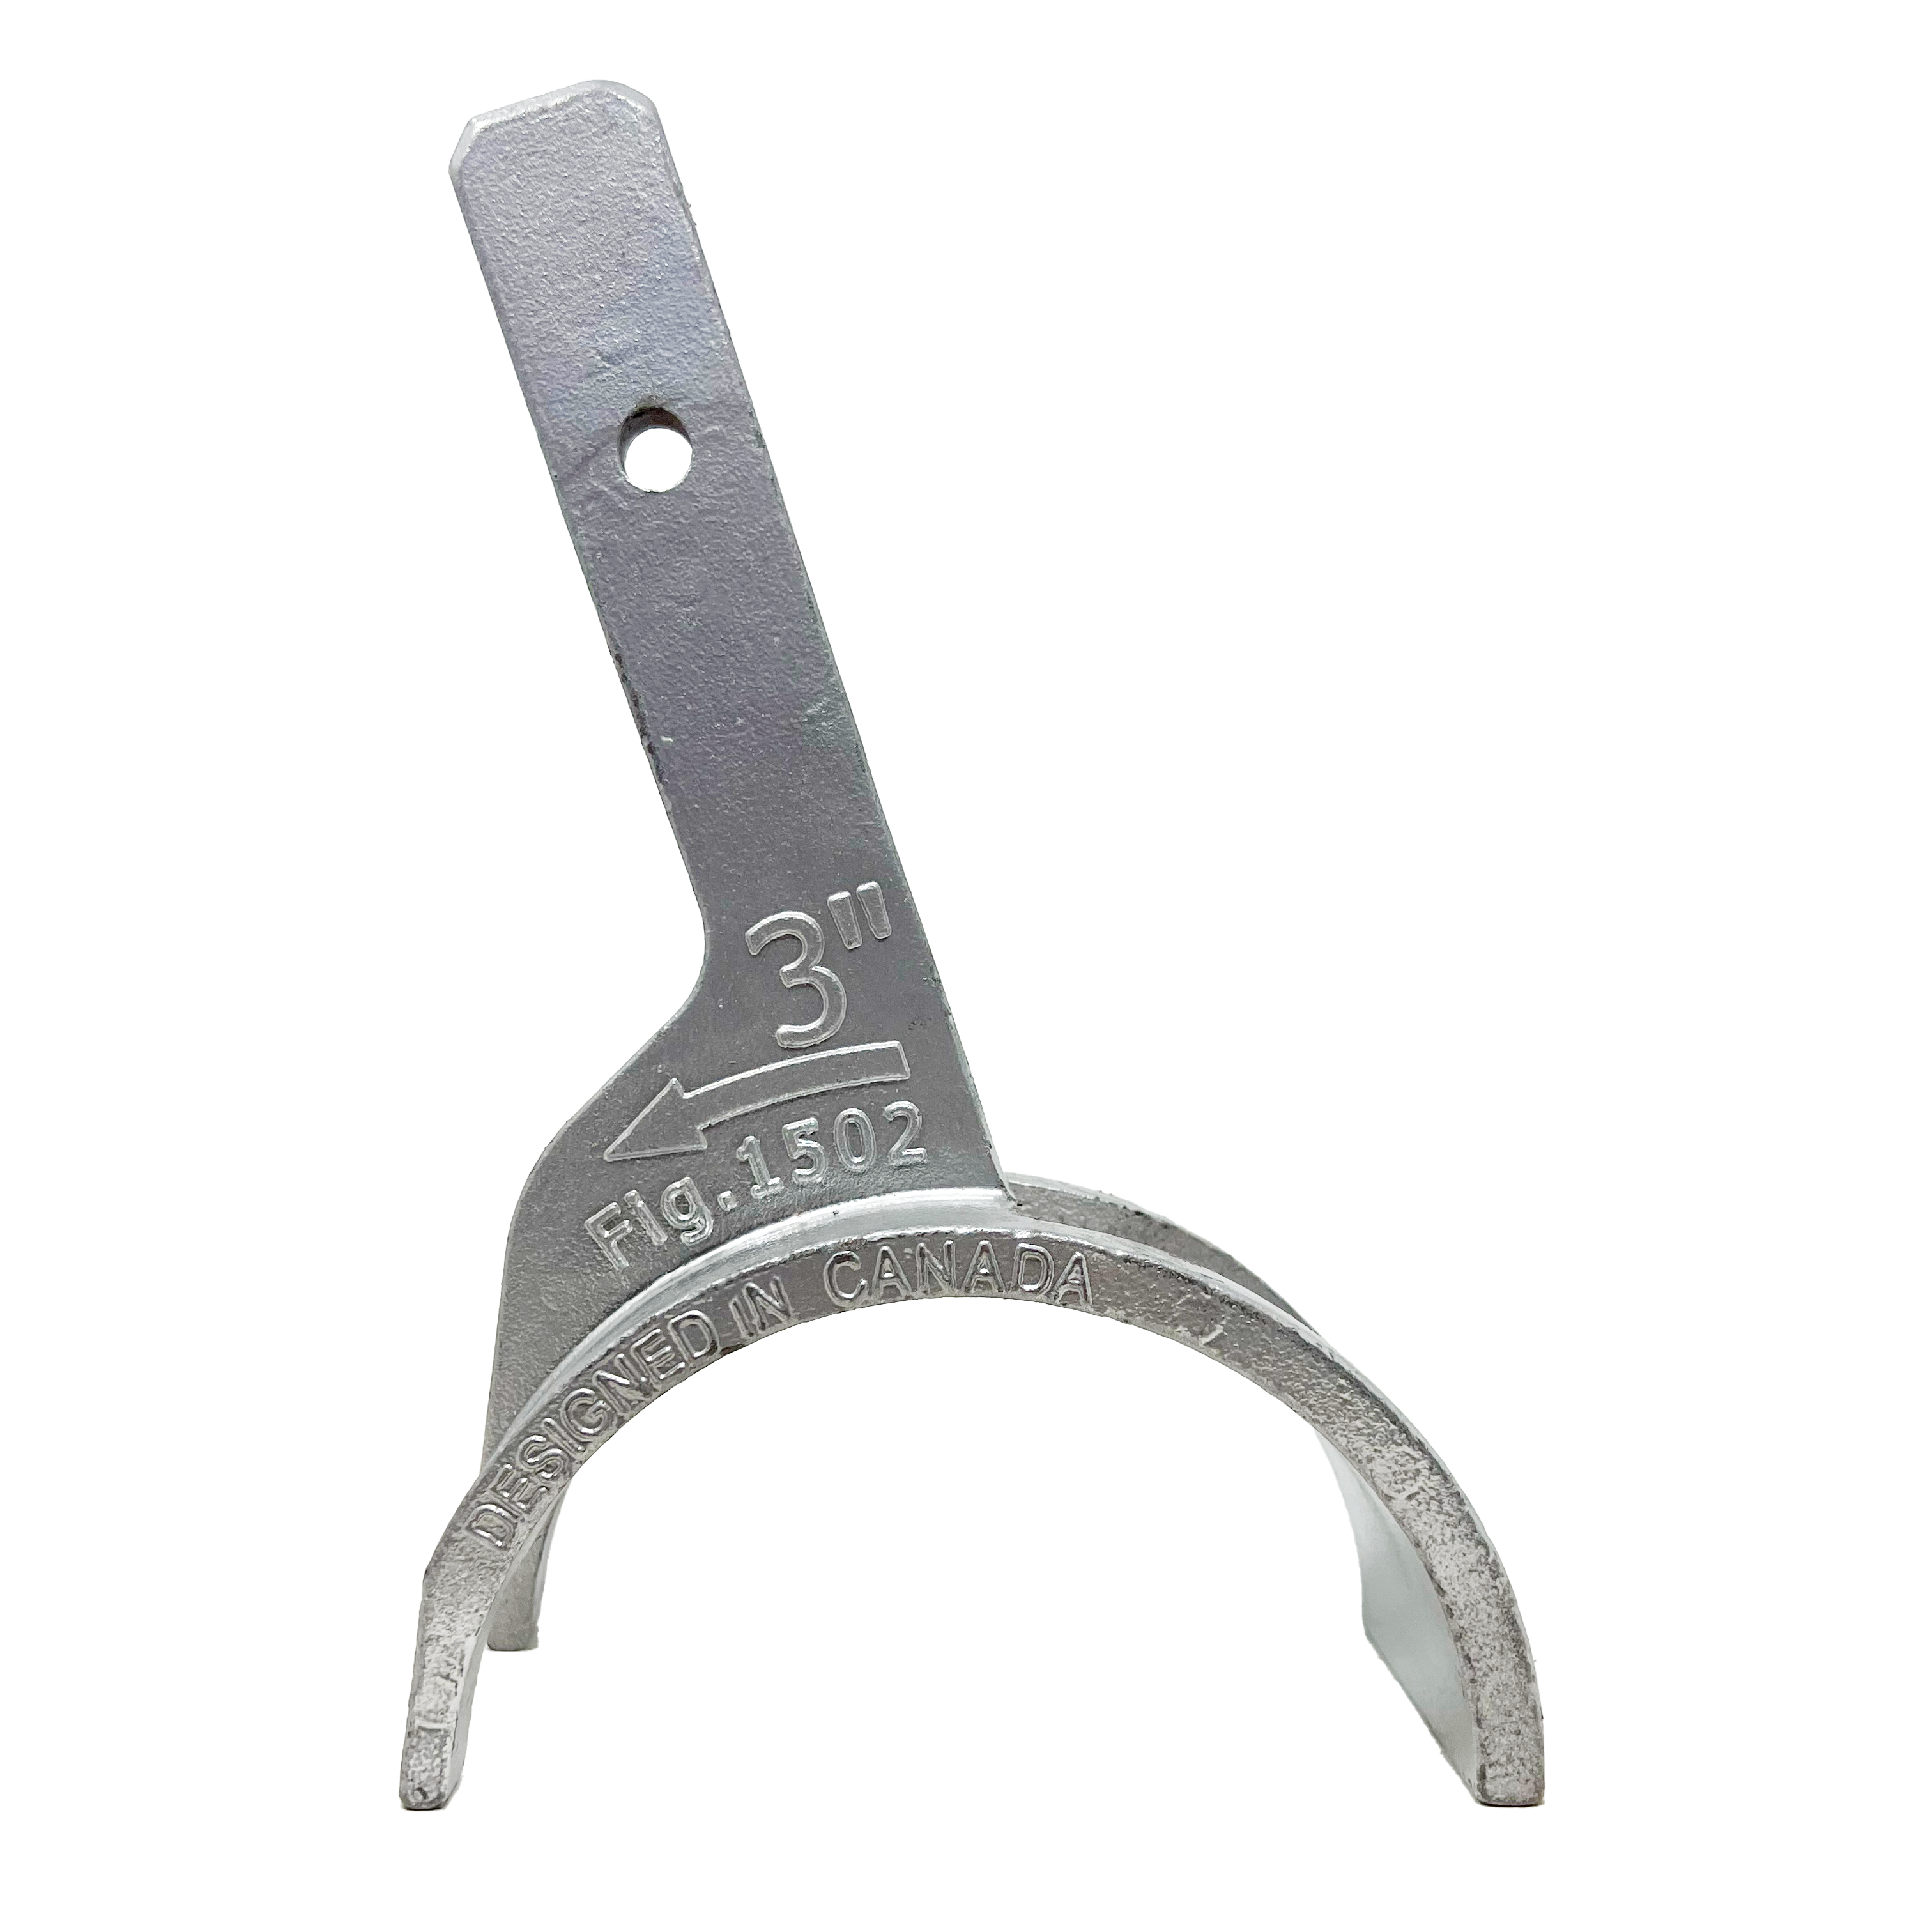 710-0024 HUWE Wrench Head for 3" Figure 1502